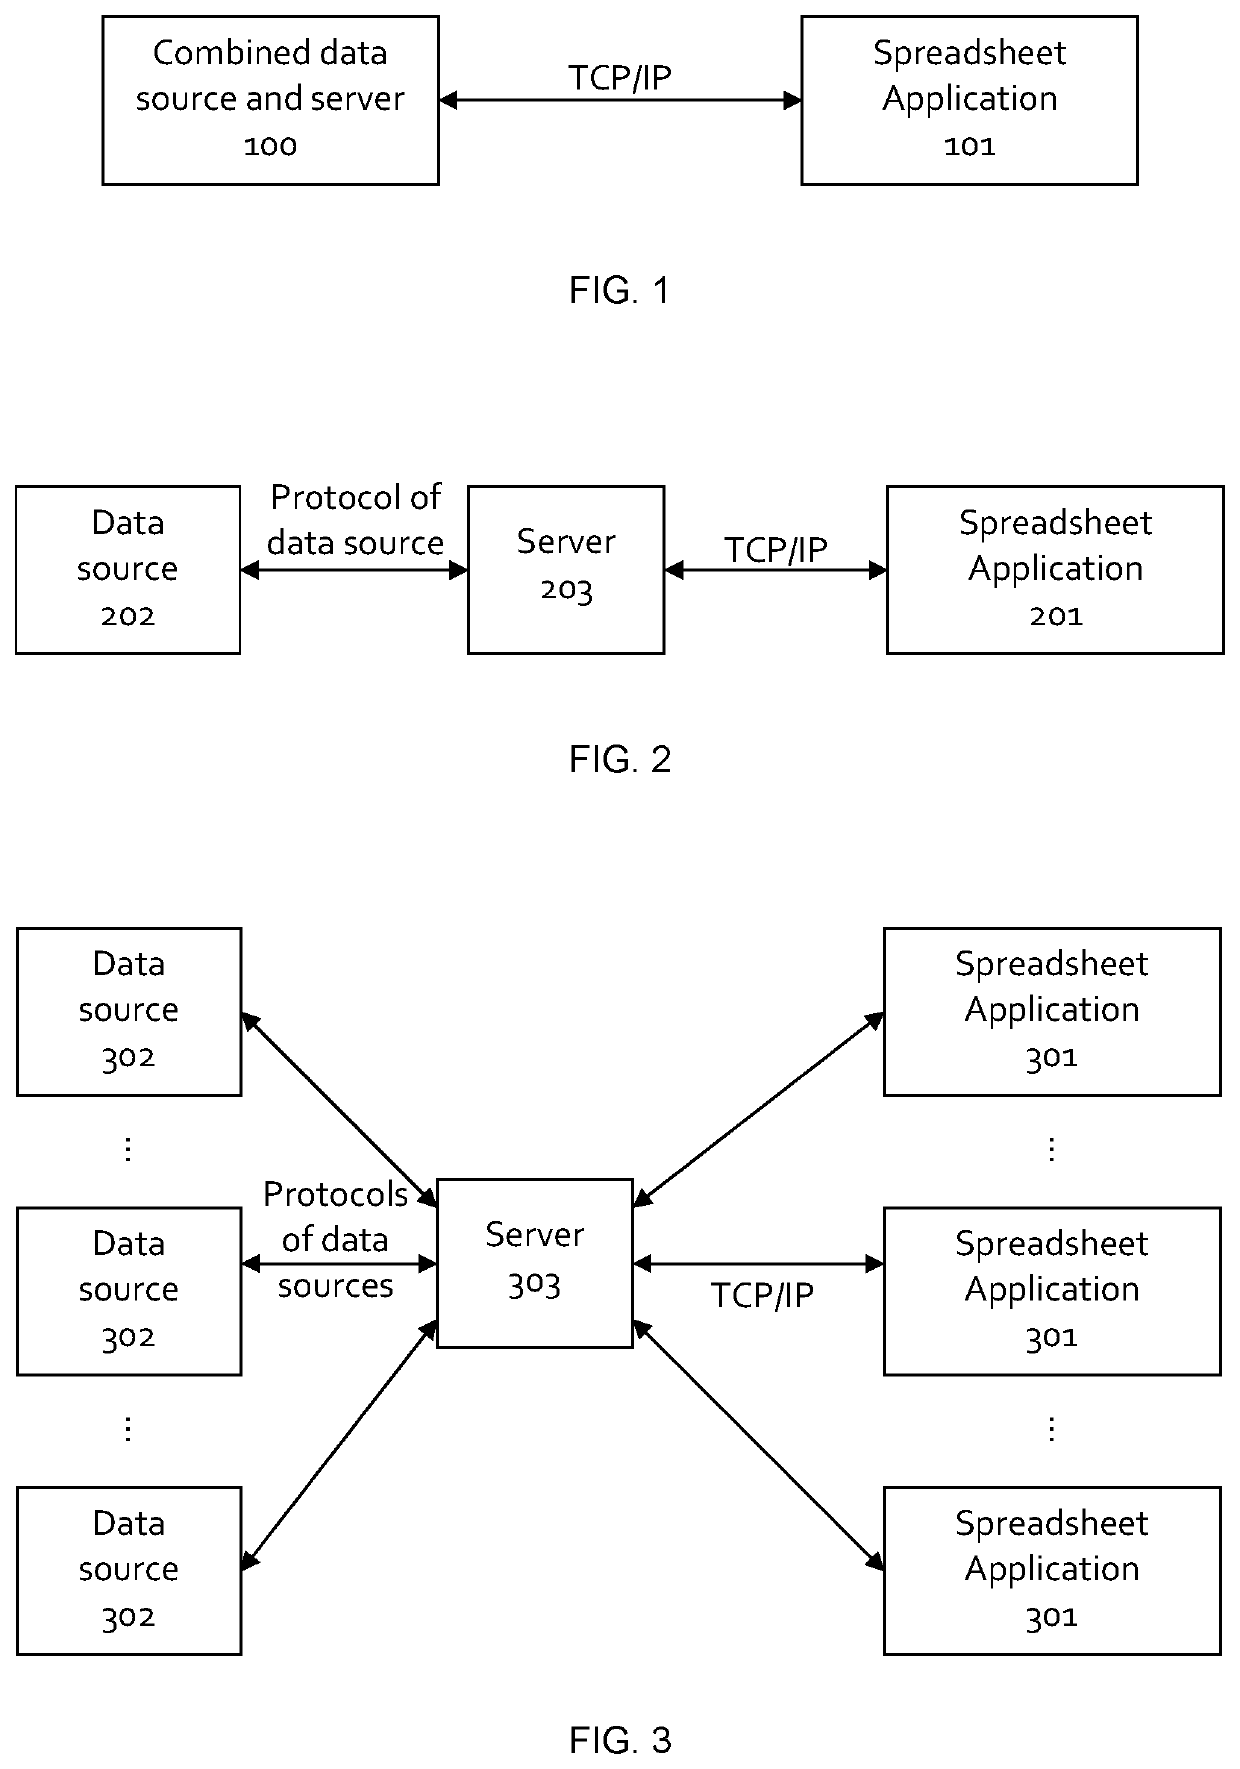 Bidirectional networked real-time data exchange using a spreadsheet application